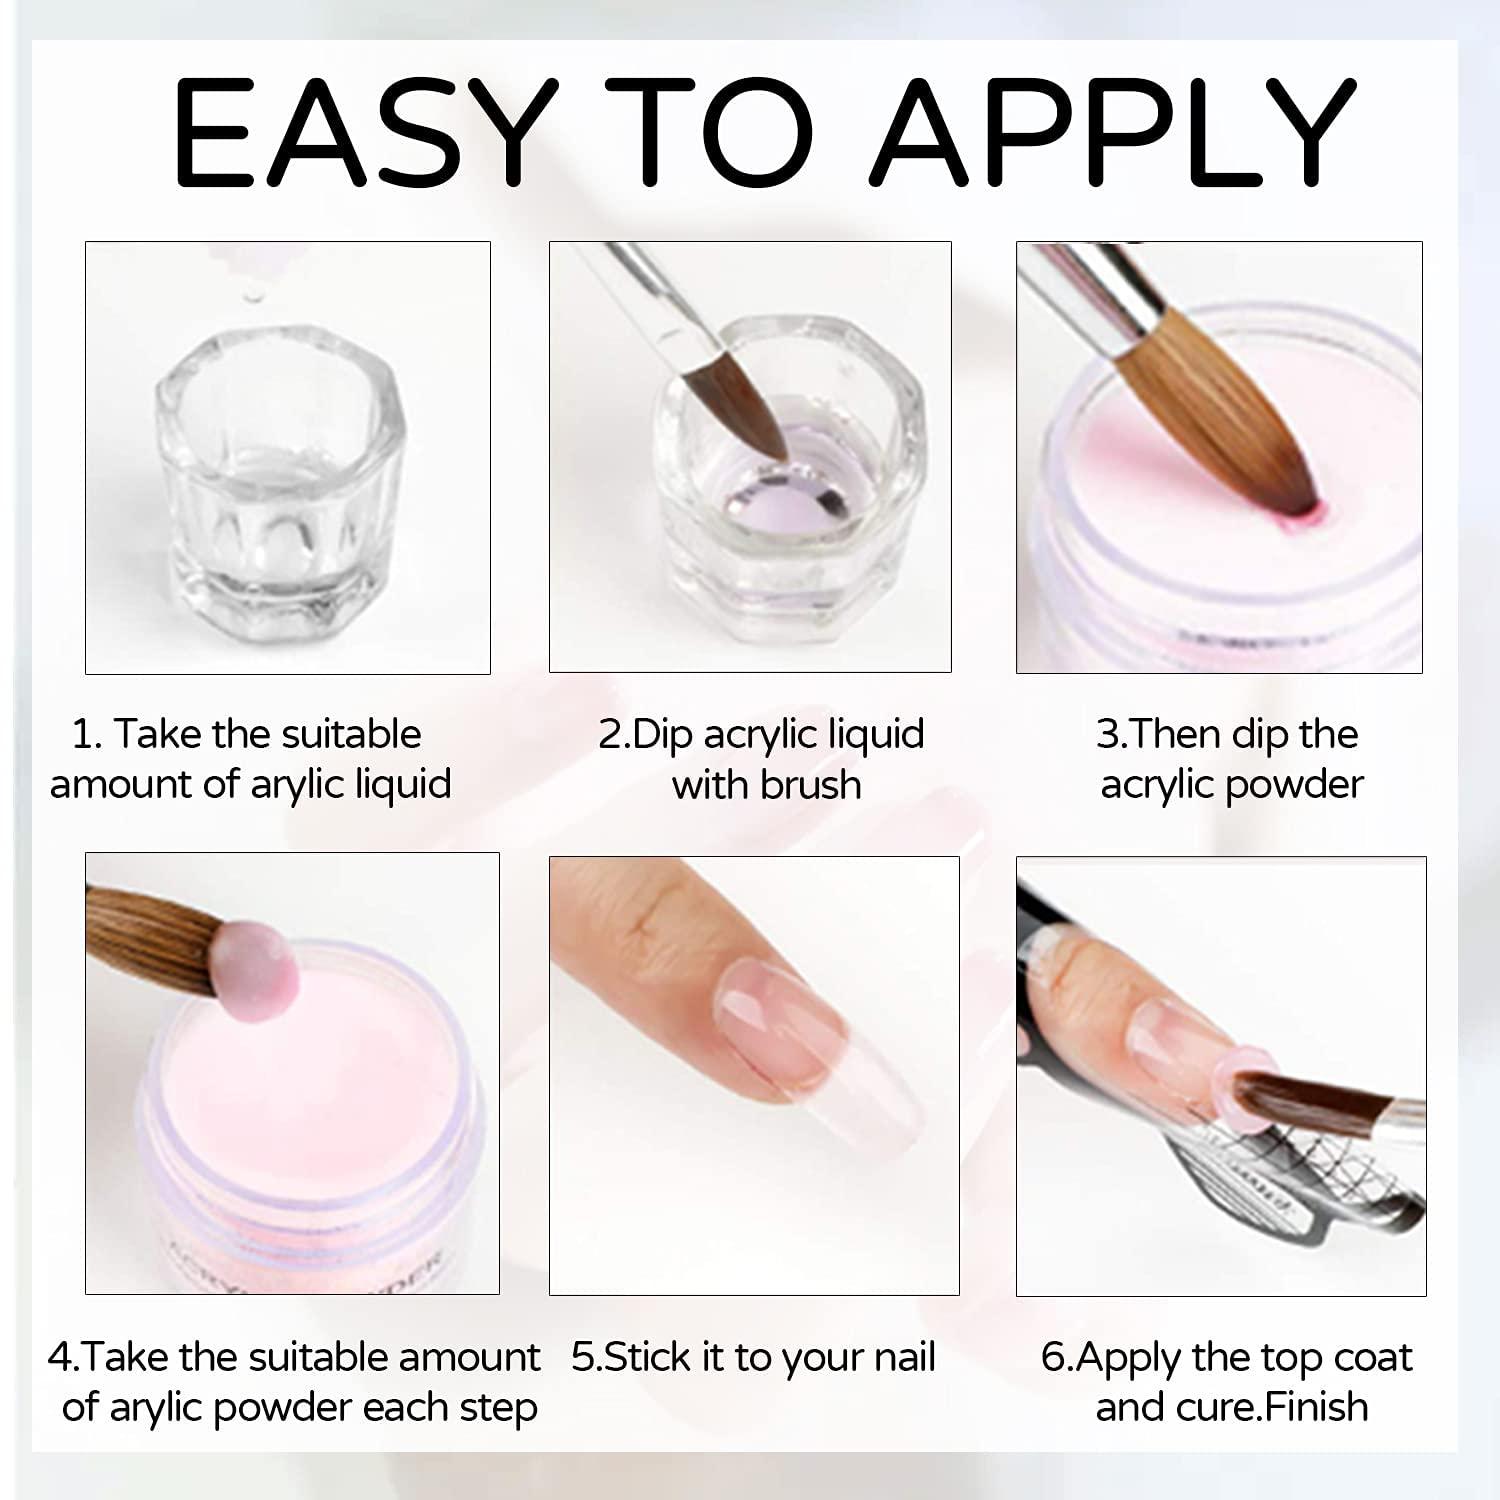 DIY Acrylic Nails: Our Step-by-Step Guide - The Find by Zulily